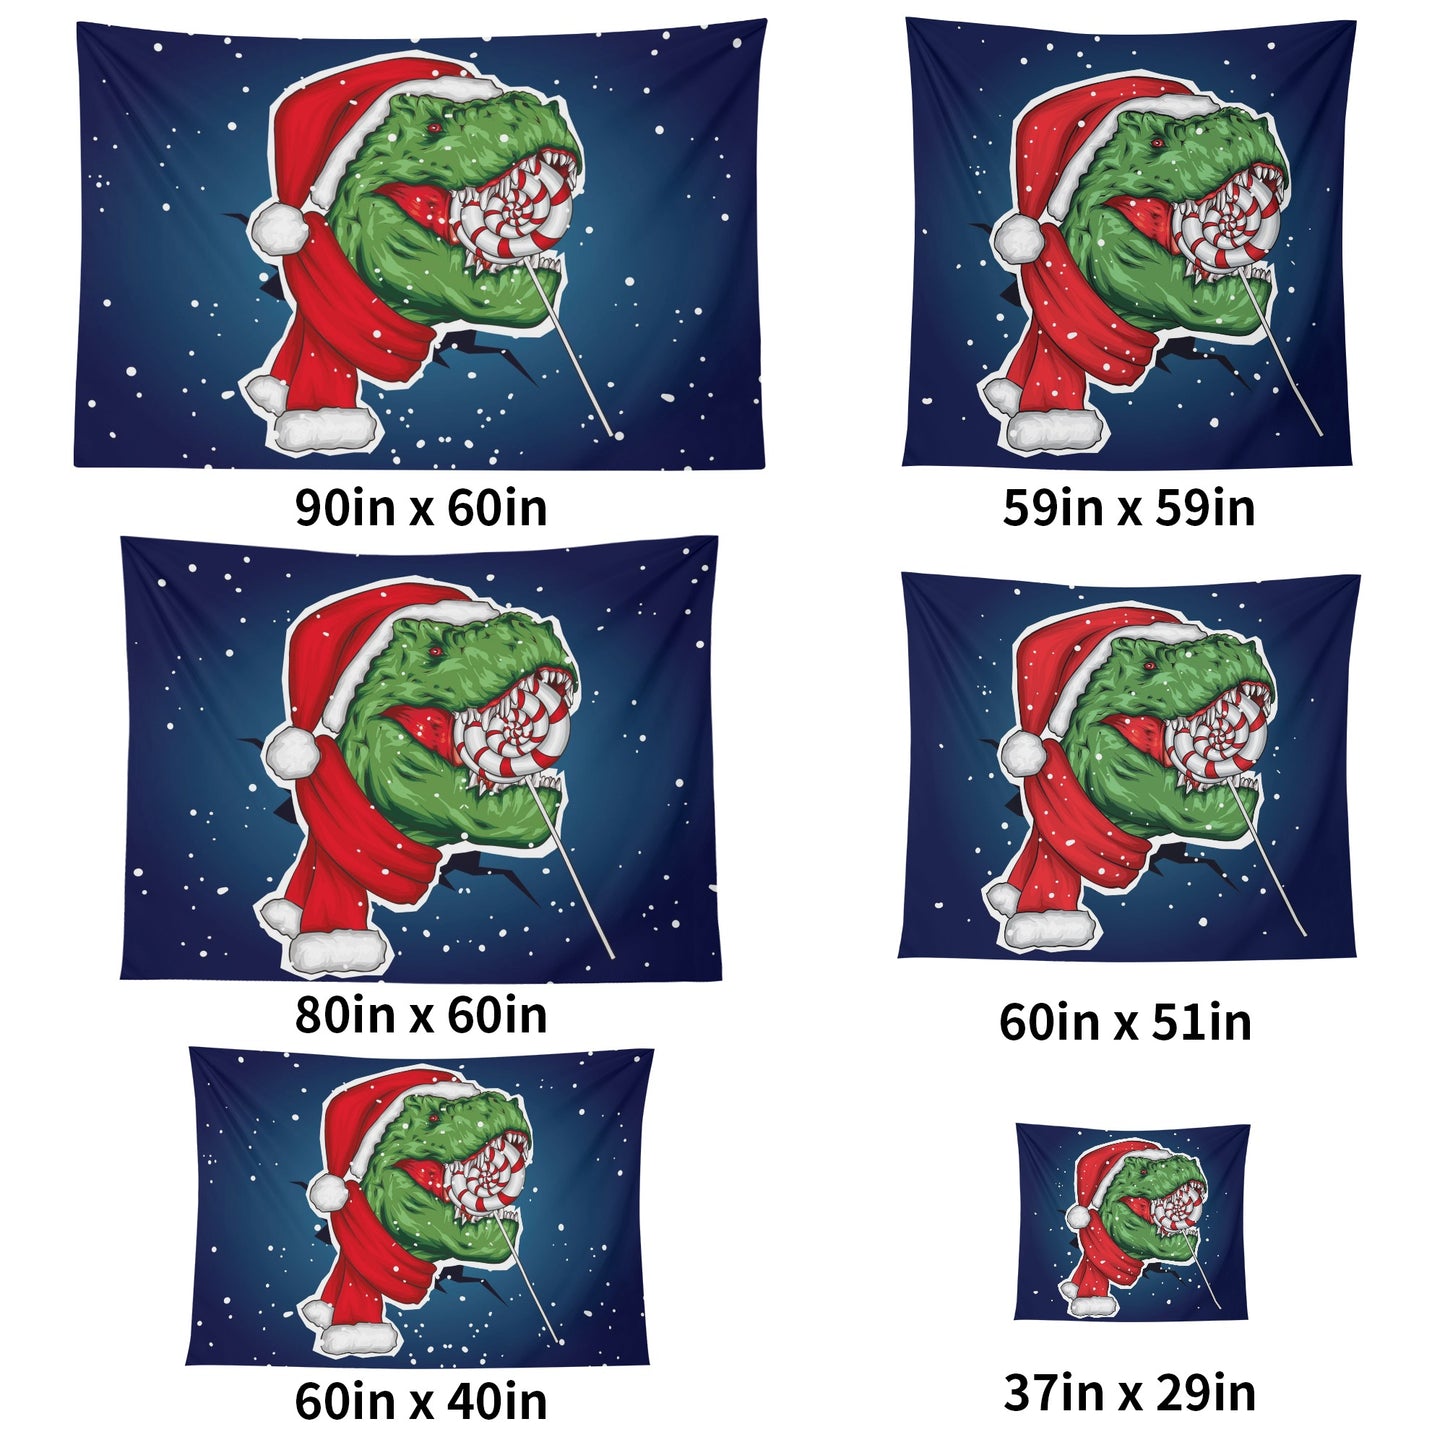 Dino Santa Brings Christmas Home With This Polyester Peach Skin Wall Tapestry 6 Sizes